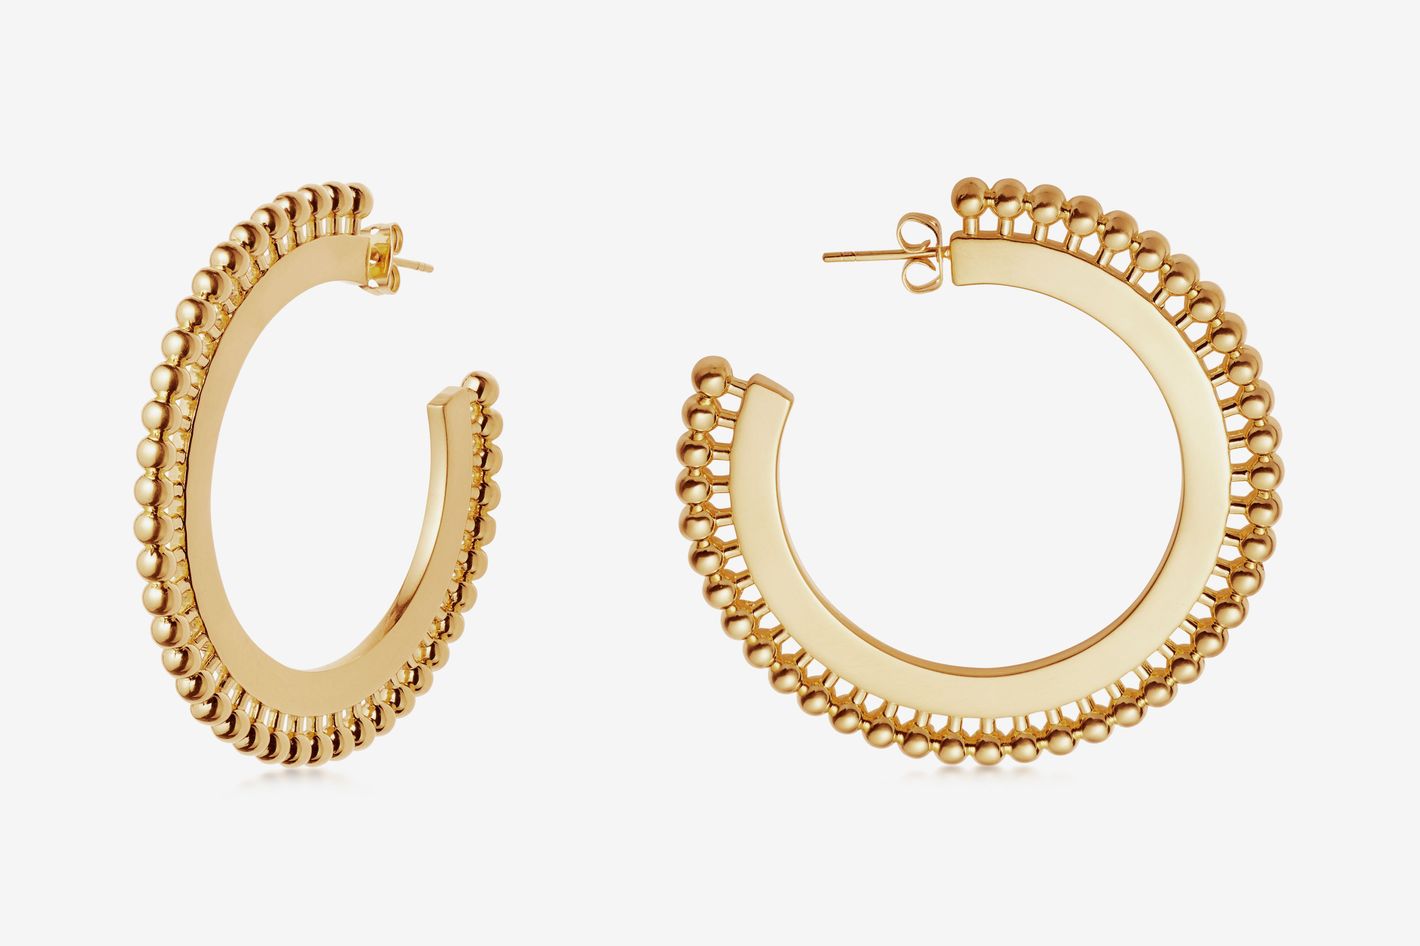 Affordable Jewelry Brand Missoma Is Launching A New Line